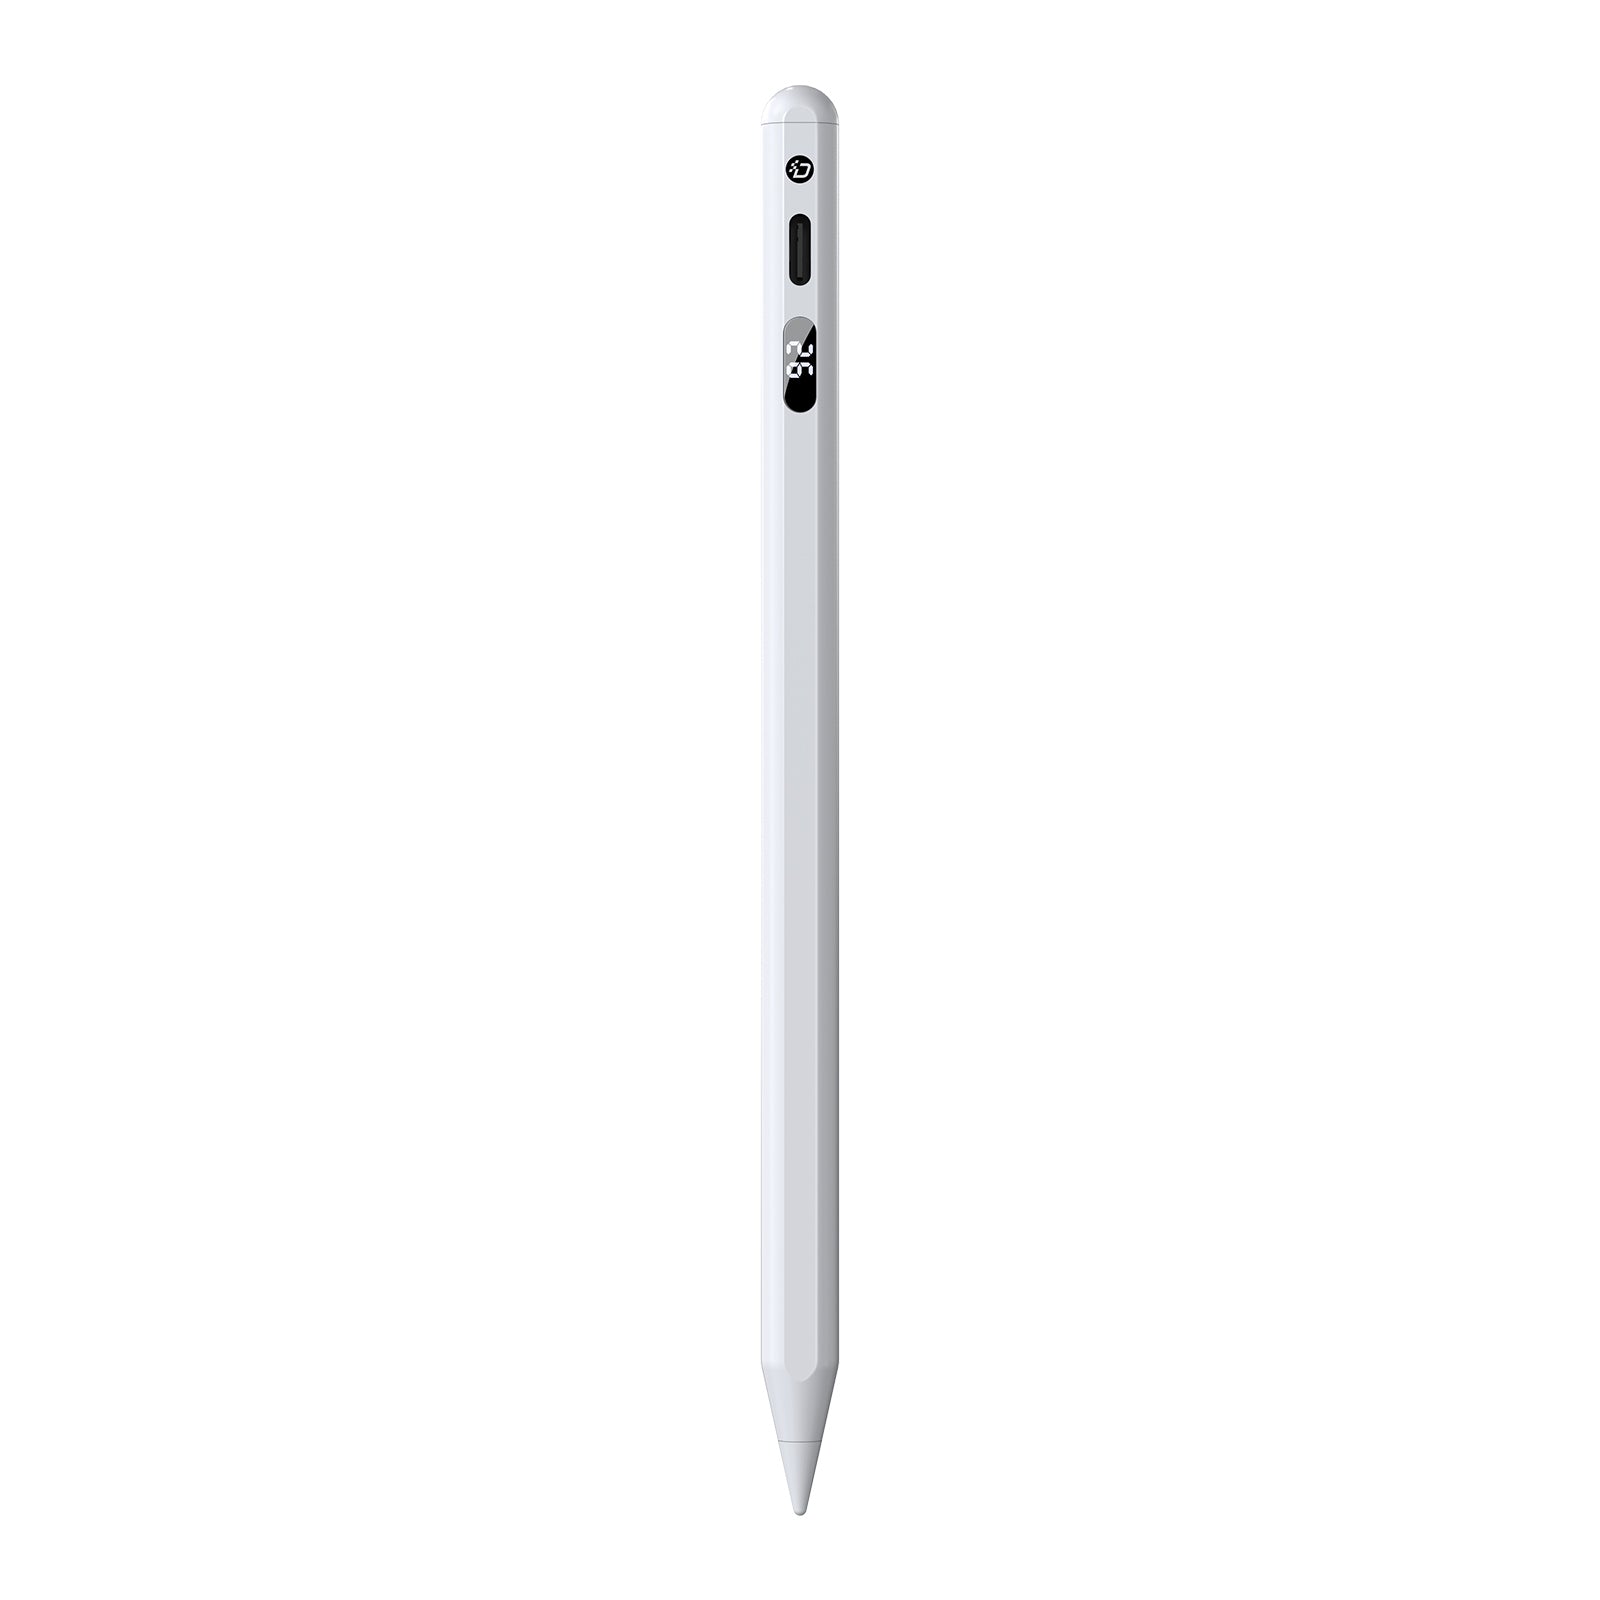 Uniqkart Stylus Pen for iPad Tablets Pen Capacitive Screen Writing Stylus Pencil with Power Display - White